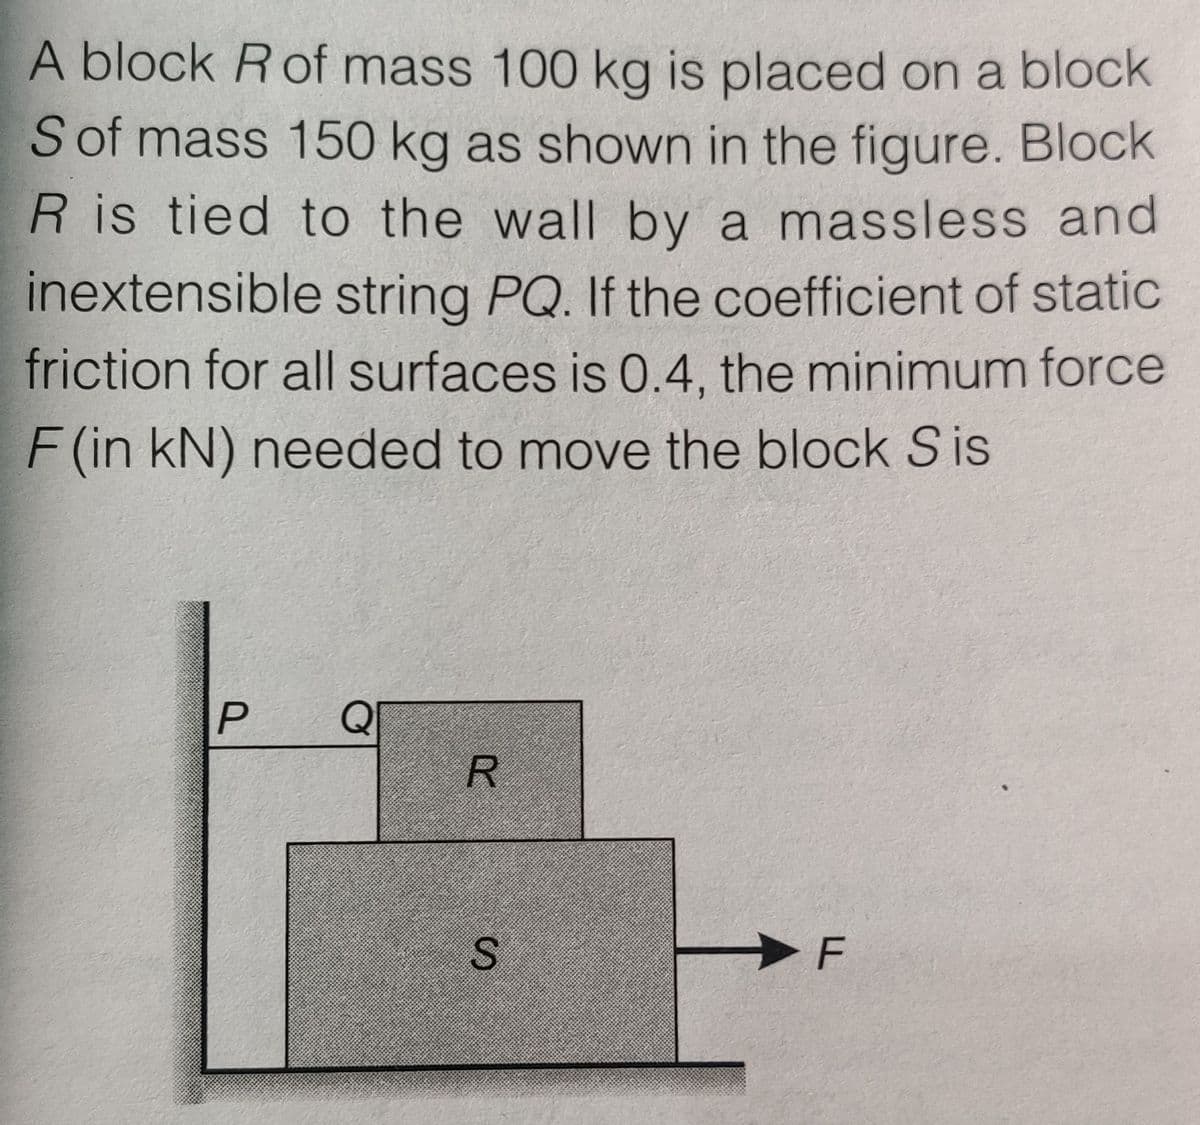 A block Rof mass 100 kg is placed on a block
Sof mass 150 kg as shown in the figure. Block
R is tied to the wall by a massless and
inextensible string PQ. If the coefficient of static
friction for all surfaces is 0.4, the minimum force
F (in kN) needed to move the block S is
Q
F
R.
